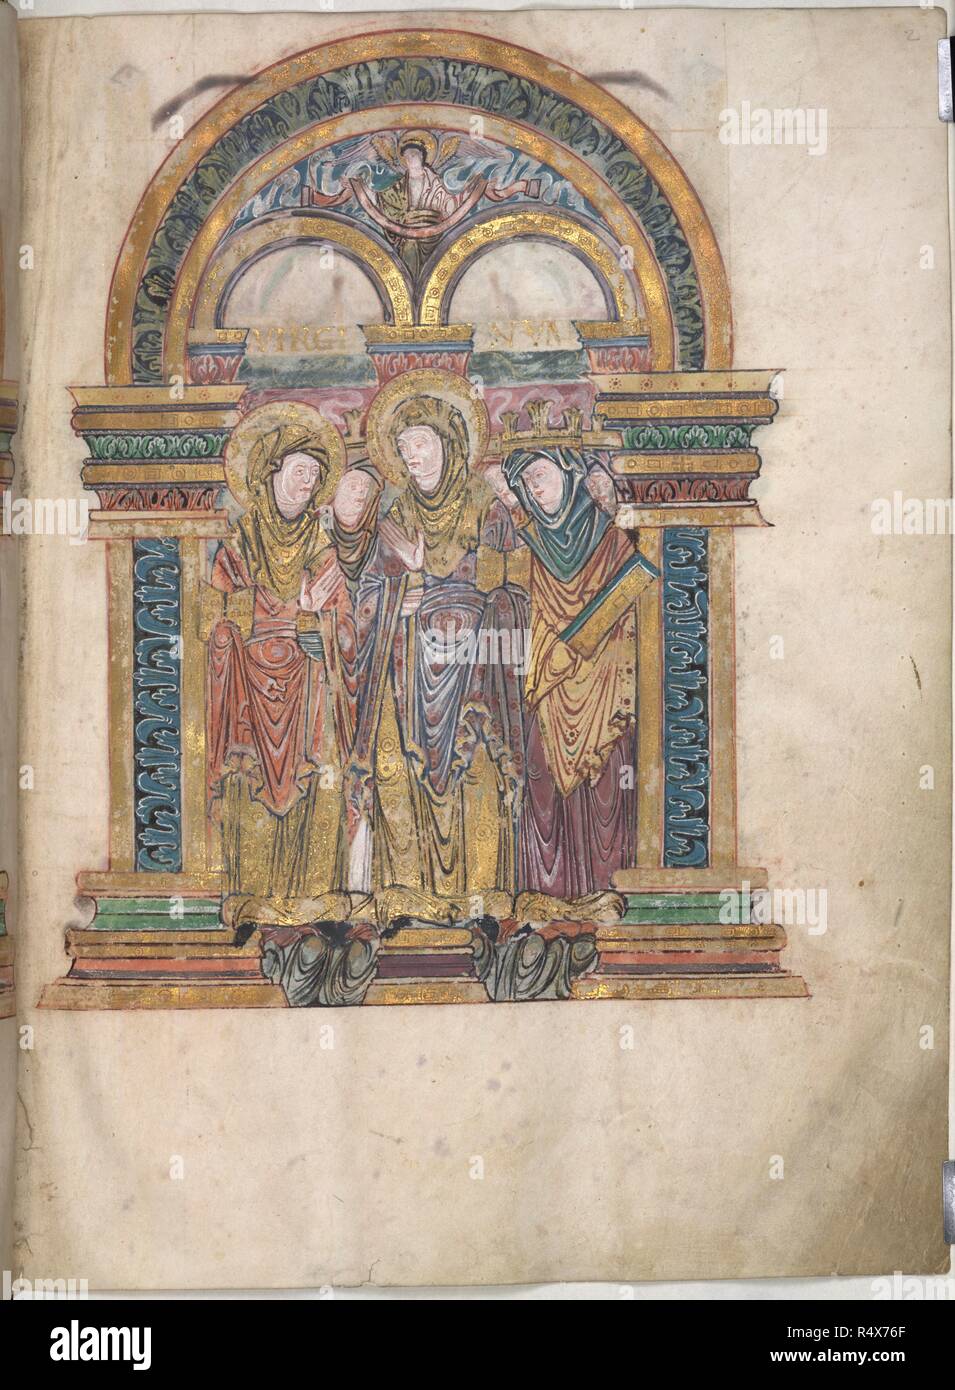 Female saints on benedictional page. The Benedictional of St Aethelwold. England. The Benedictional of St Aethelwold Benedictional, written by the scribe Godeman for St Ã†thelwold, Bishop of Winchester; 963-984. Latin. The Choir of Virgins, in one group of seven and another of six, the second including St Ã†theldreda and, apparently, the Blessed Virgin Mary. Source: Add. 49598 f.2. Language: Latin. Stock Photo